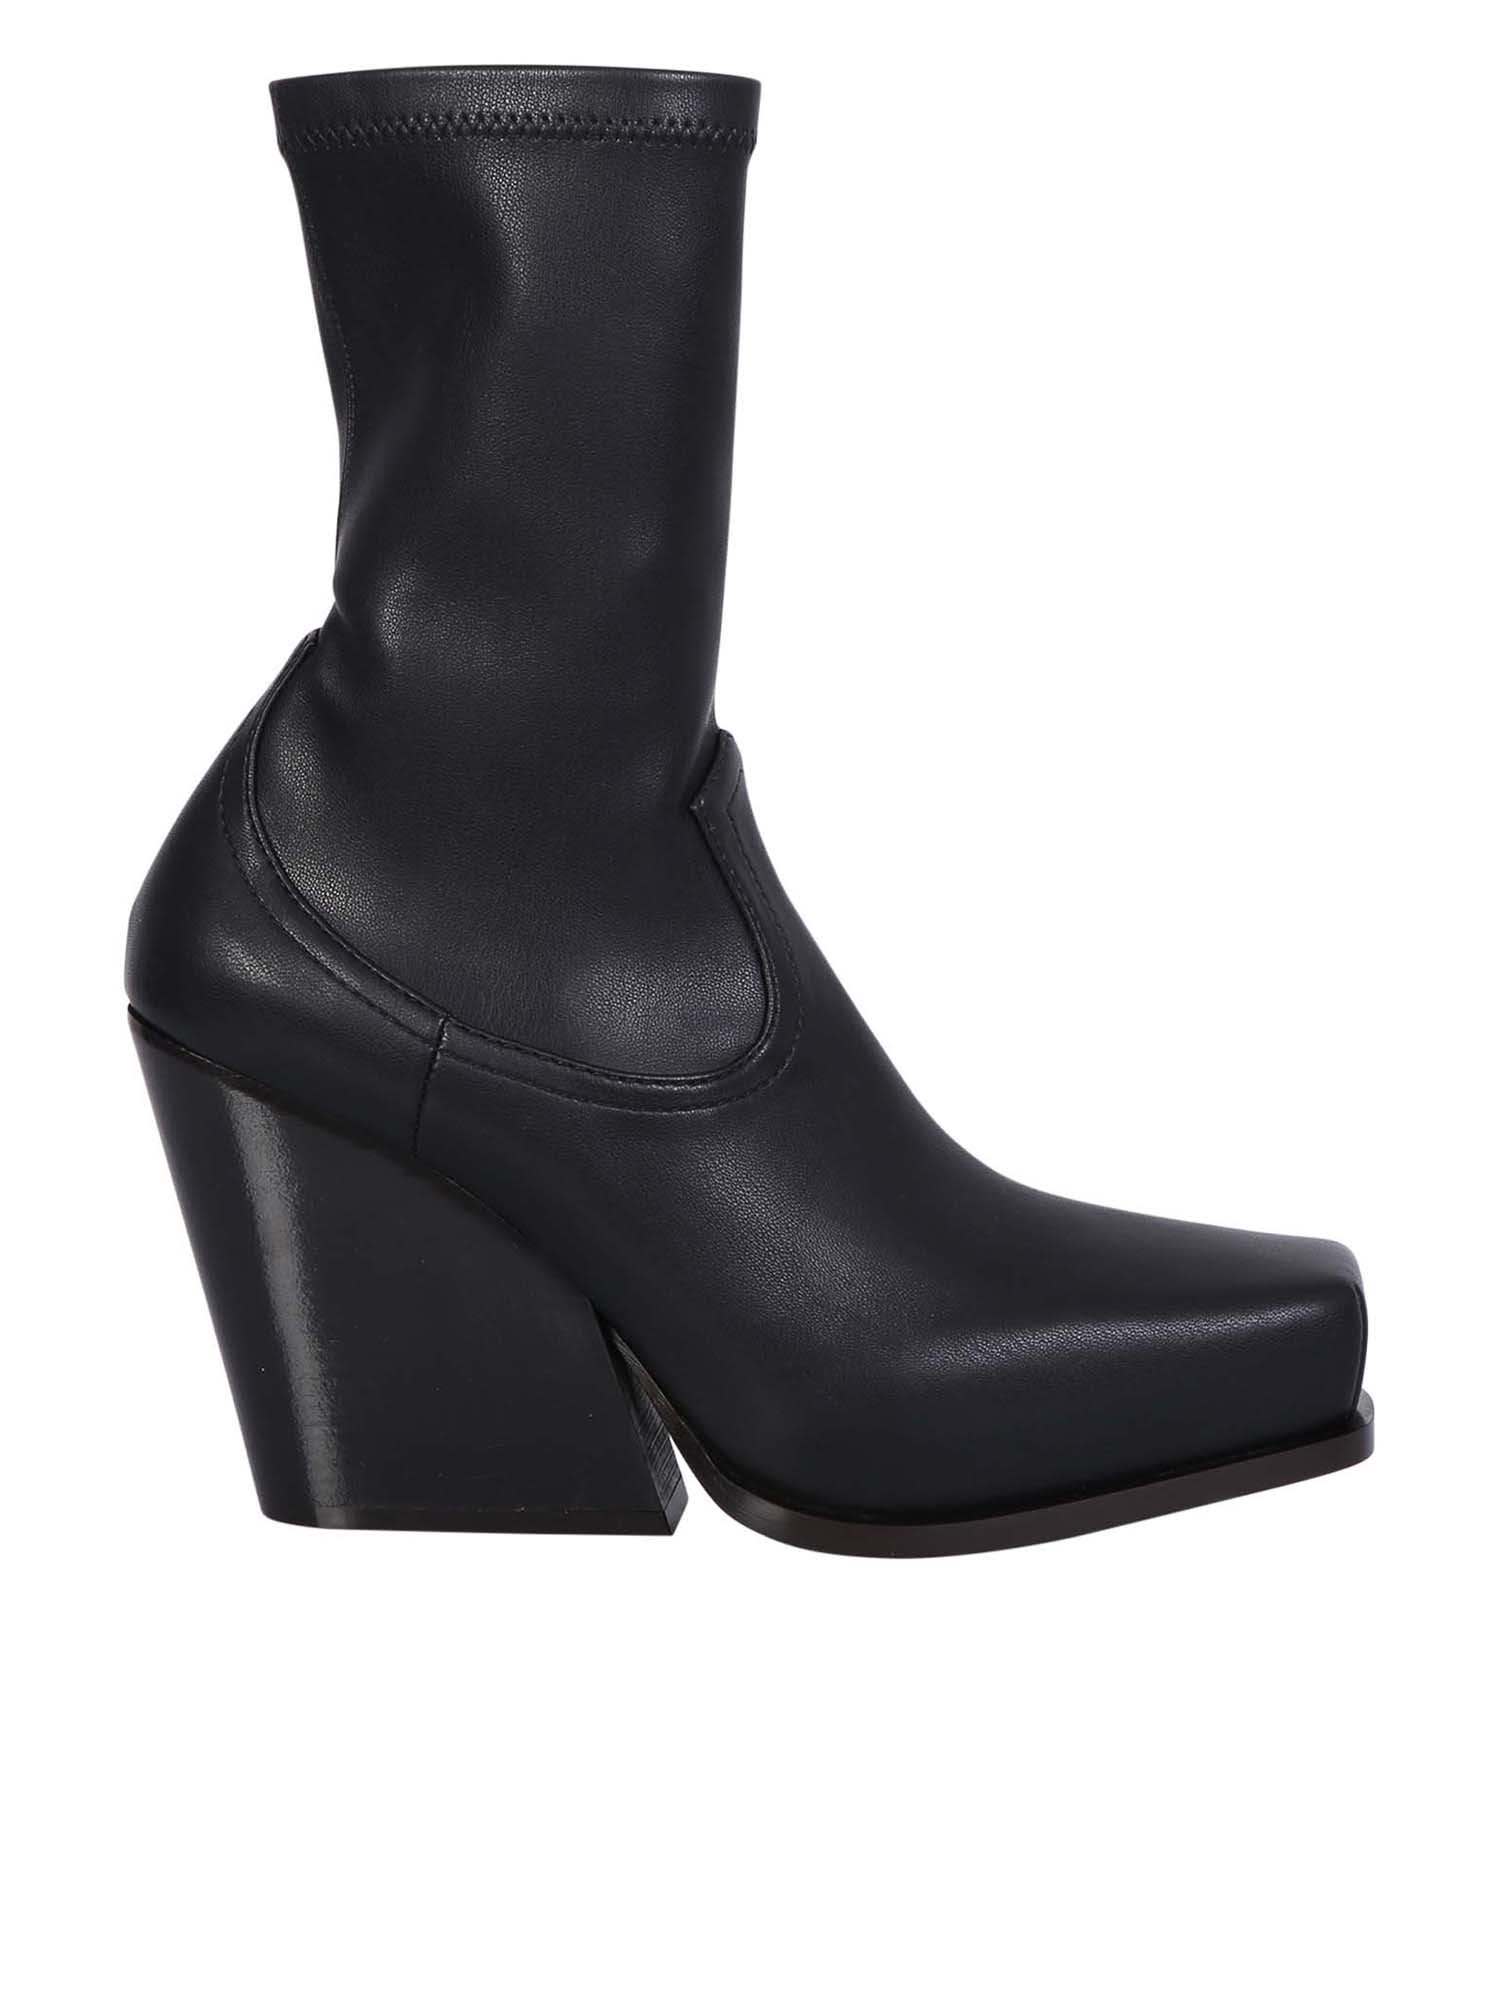 Stella McCartney Black Cowboy Ankle Boots In Faux Leather